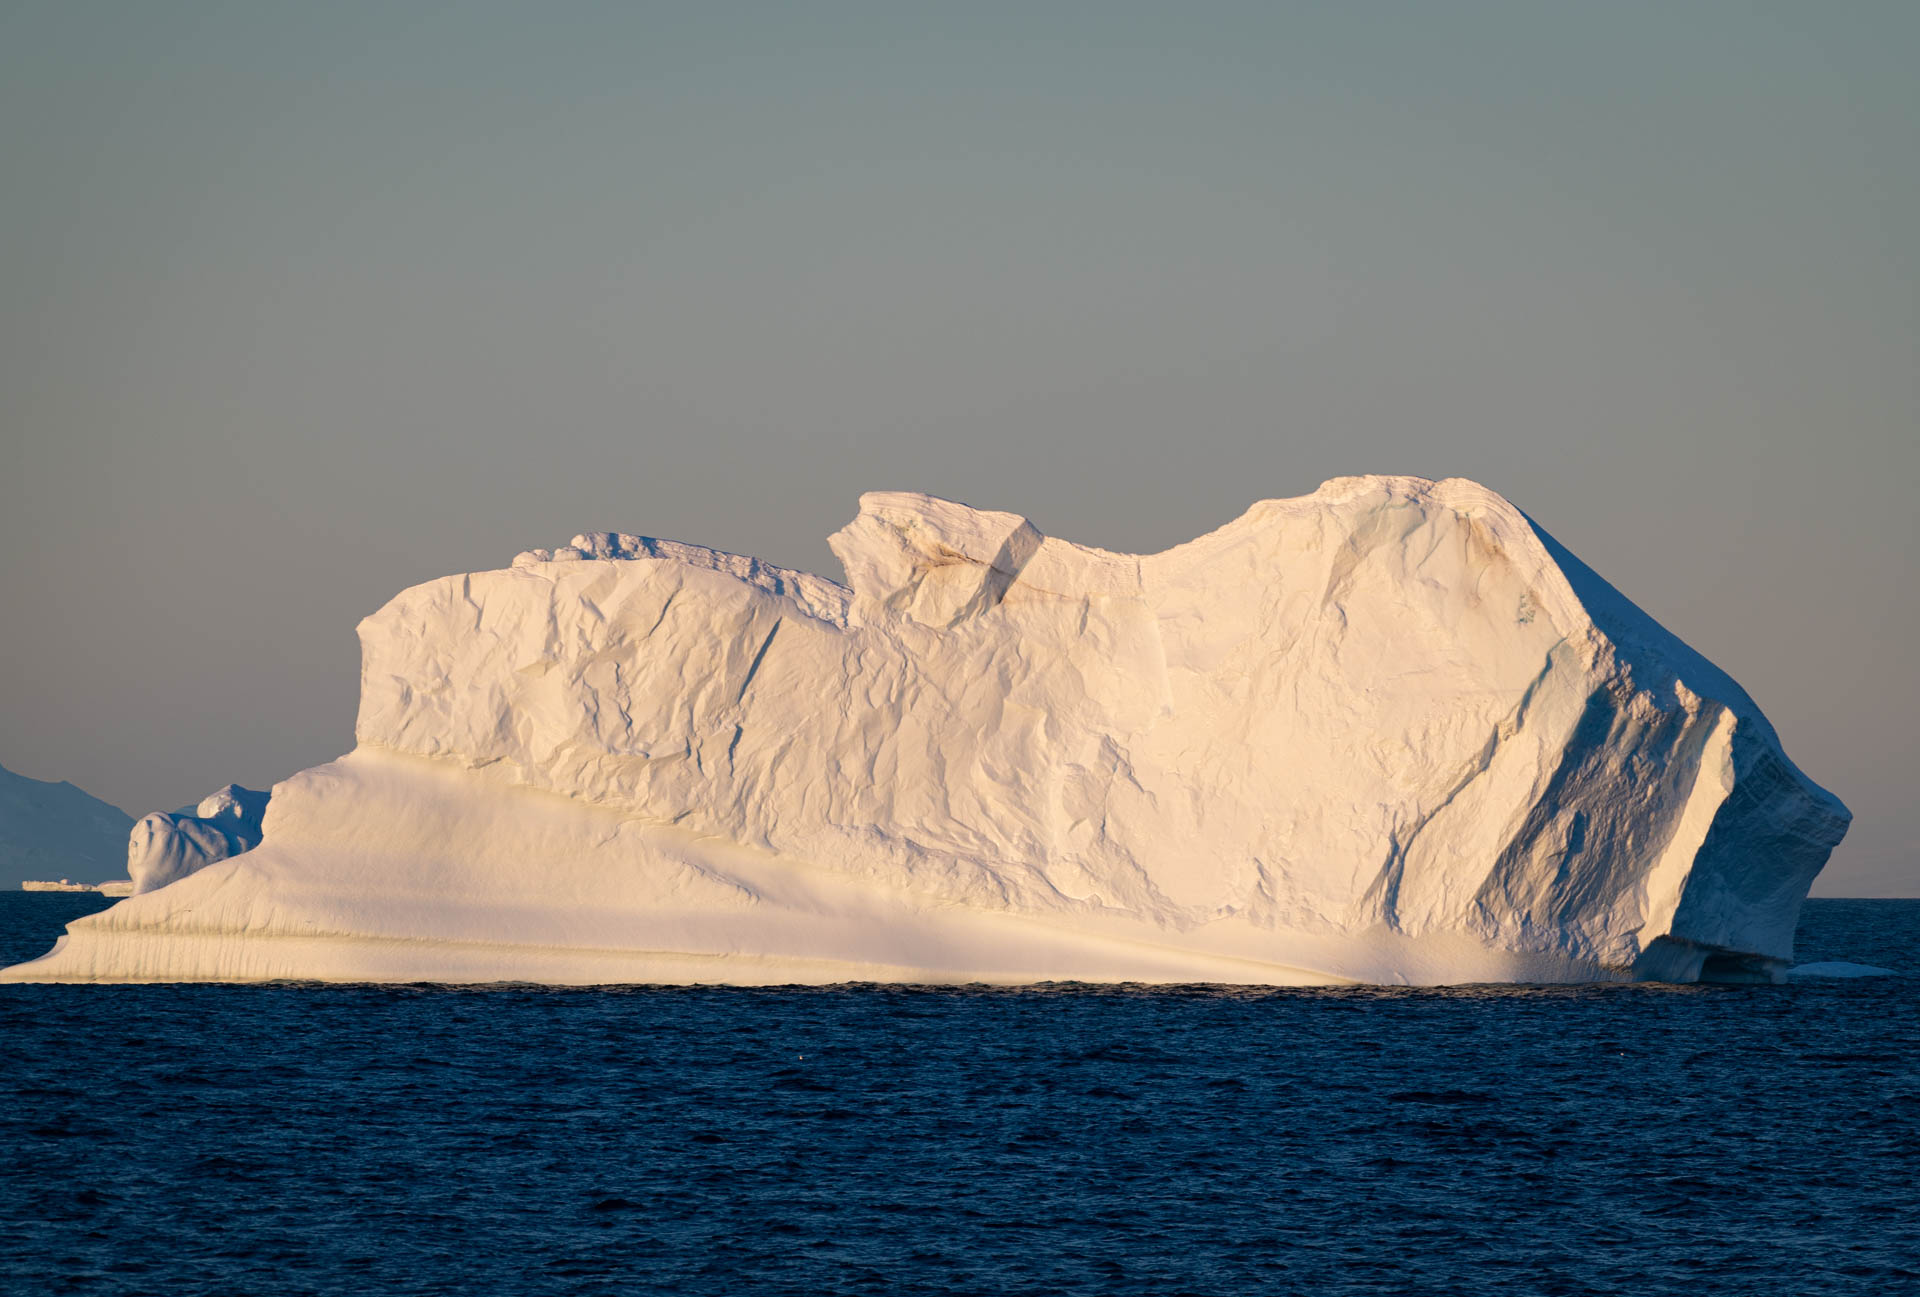 Iceberg in the Freud Passage